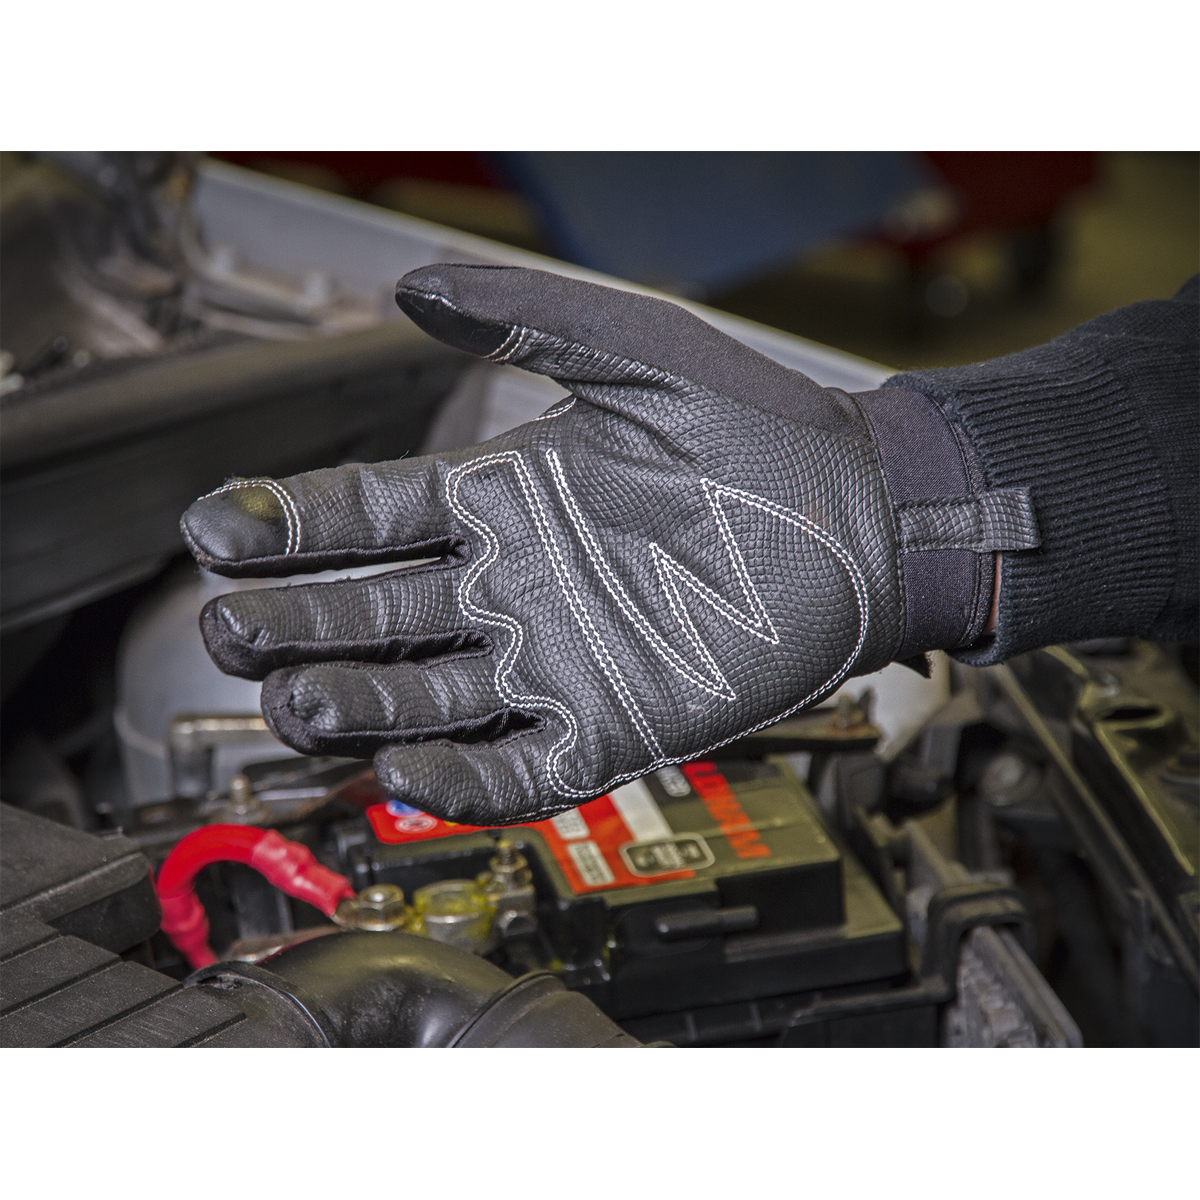 Mechanic's Gloves Light Palm Tactouch - Large